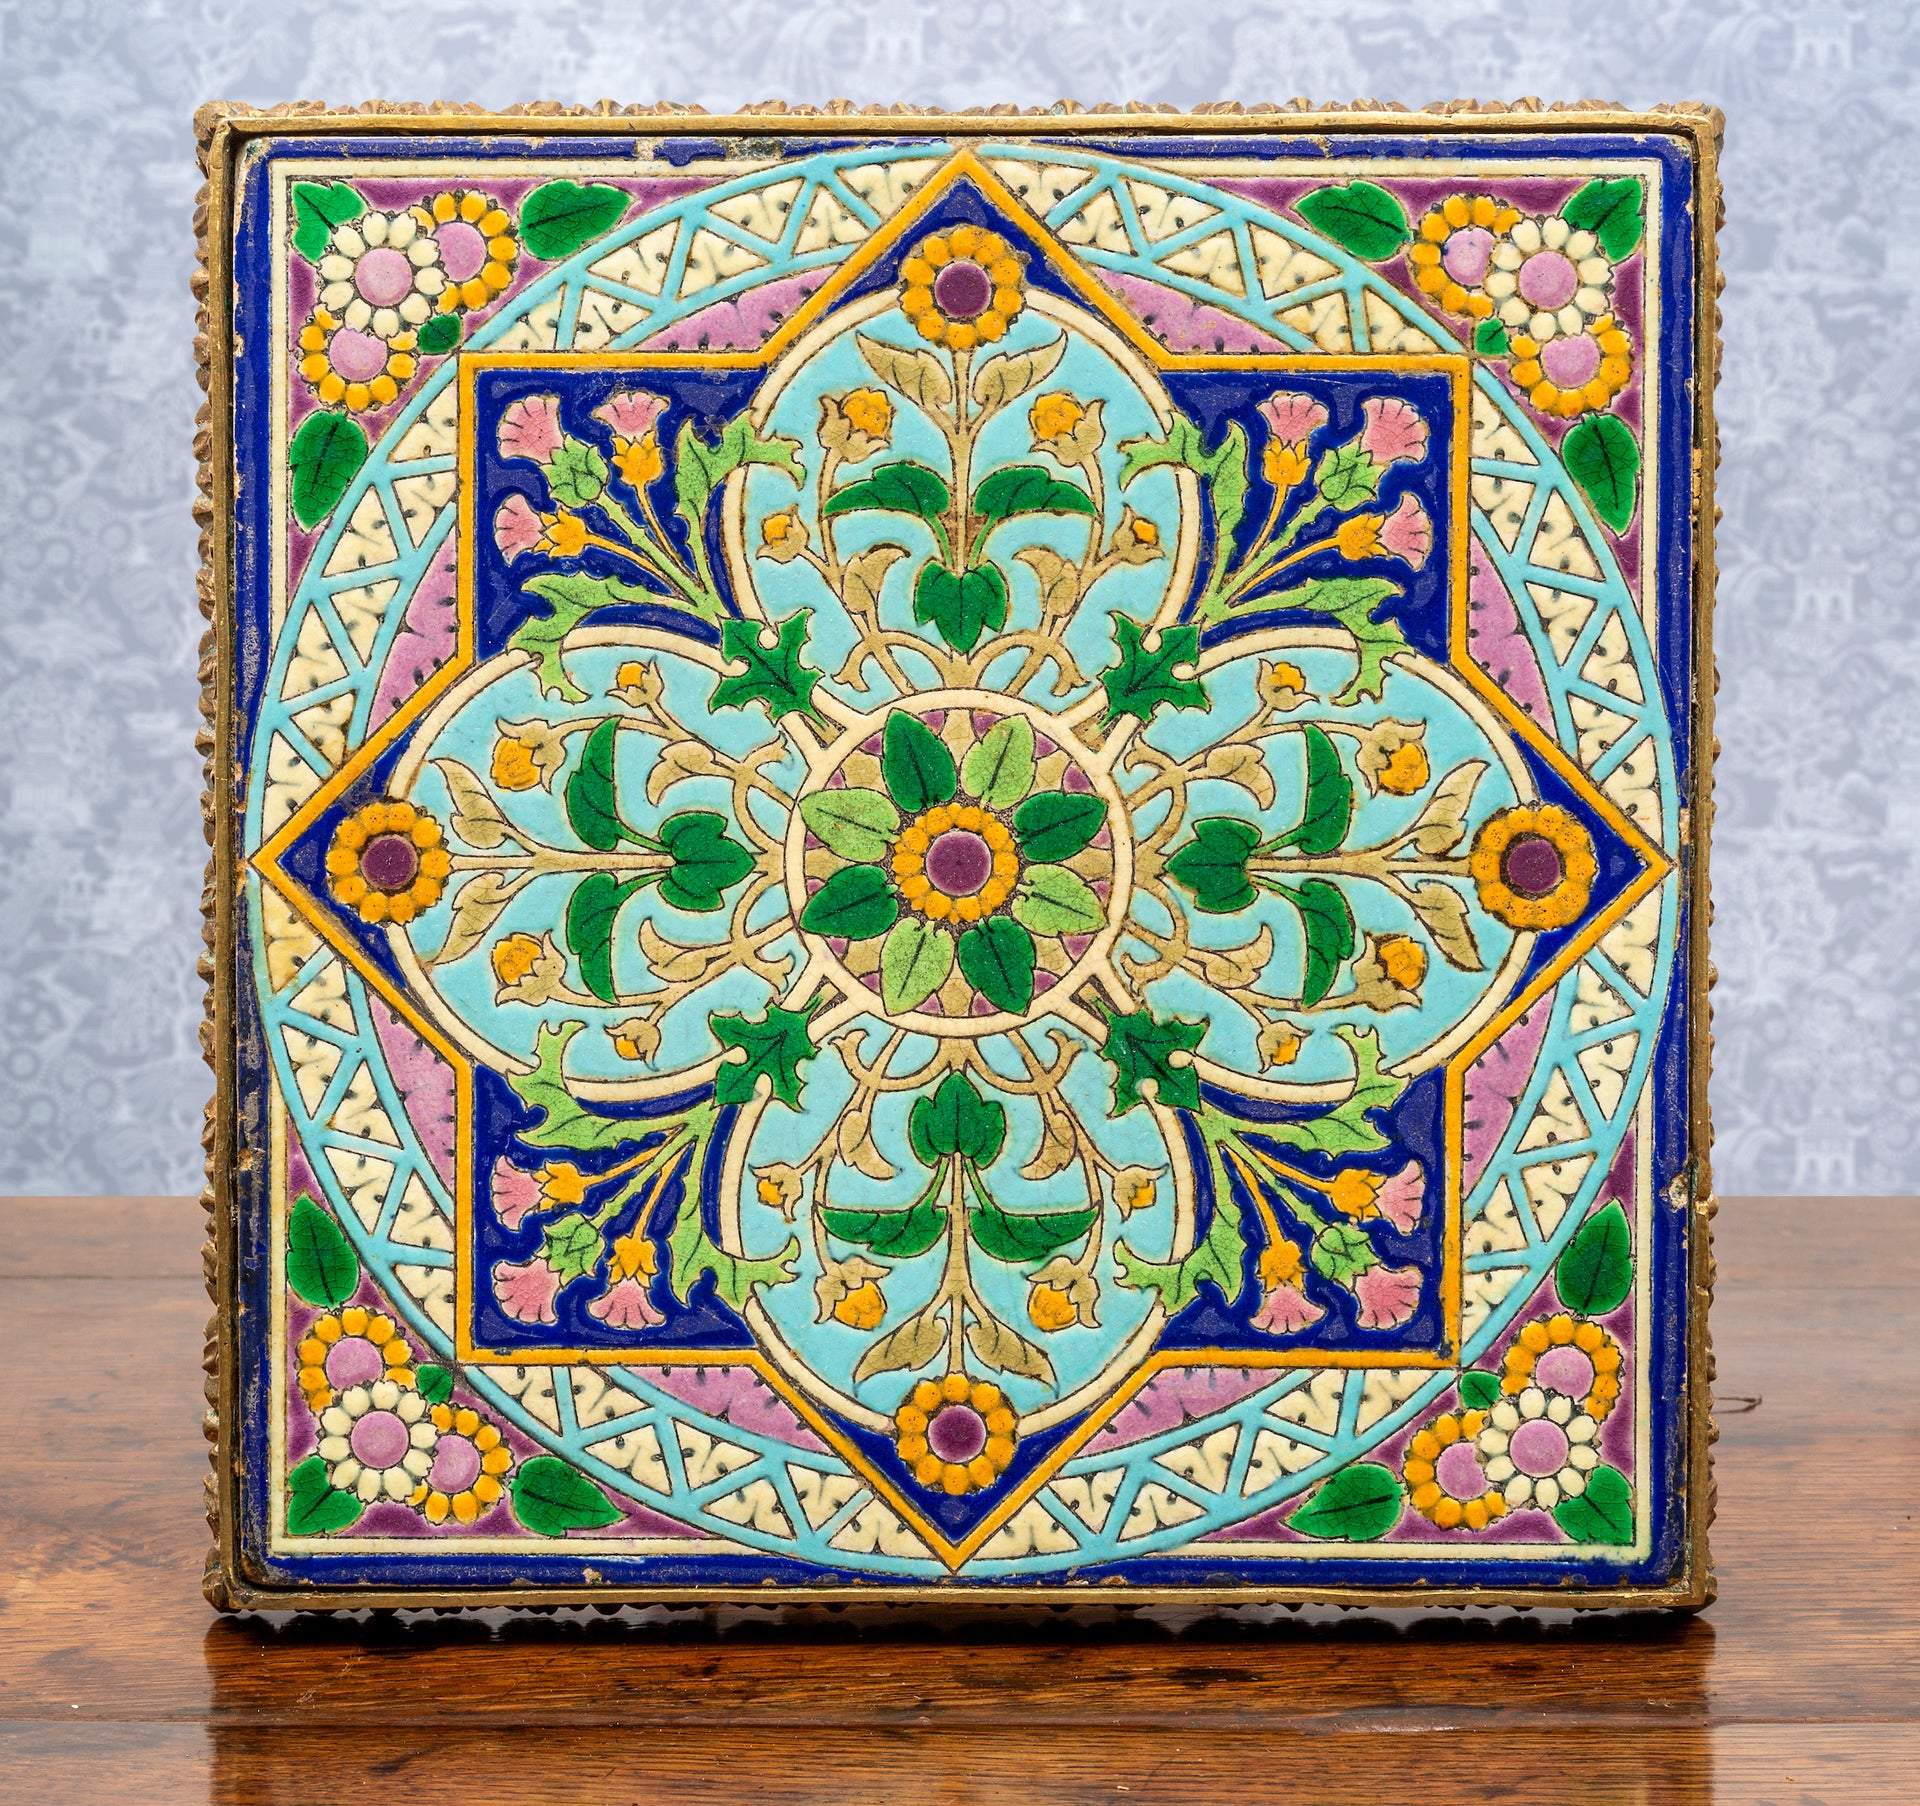 SOLD A very beautiful and decorative tile trivet by Gien, French 19th Century